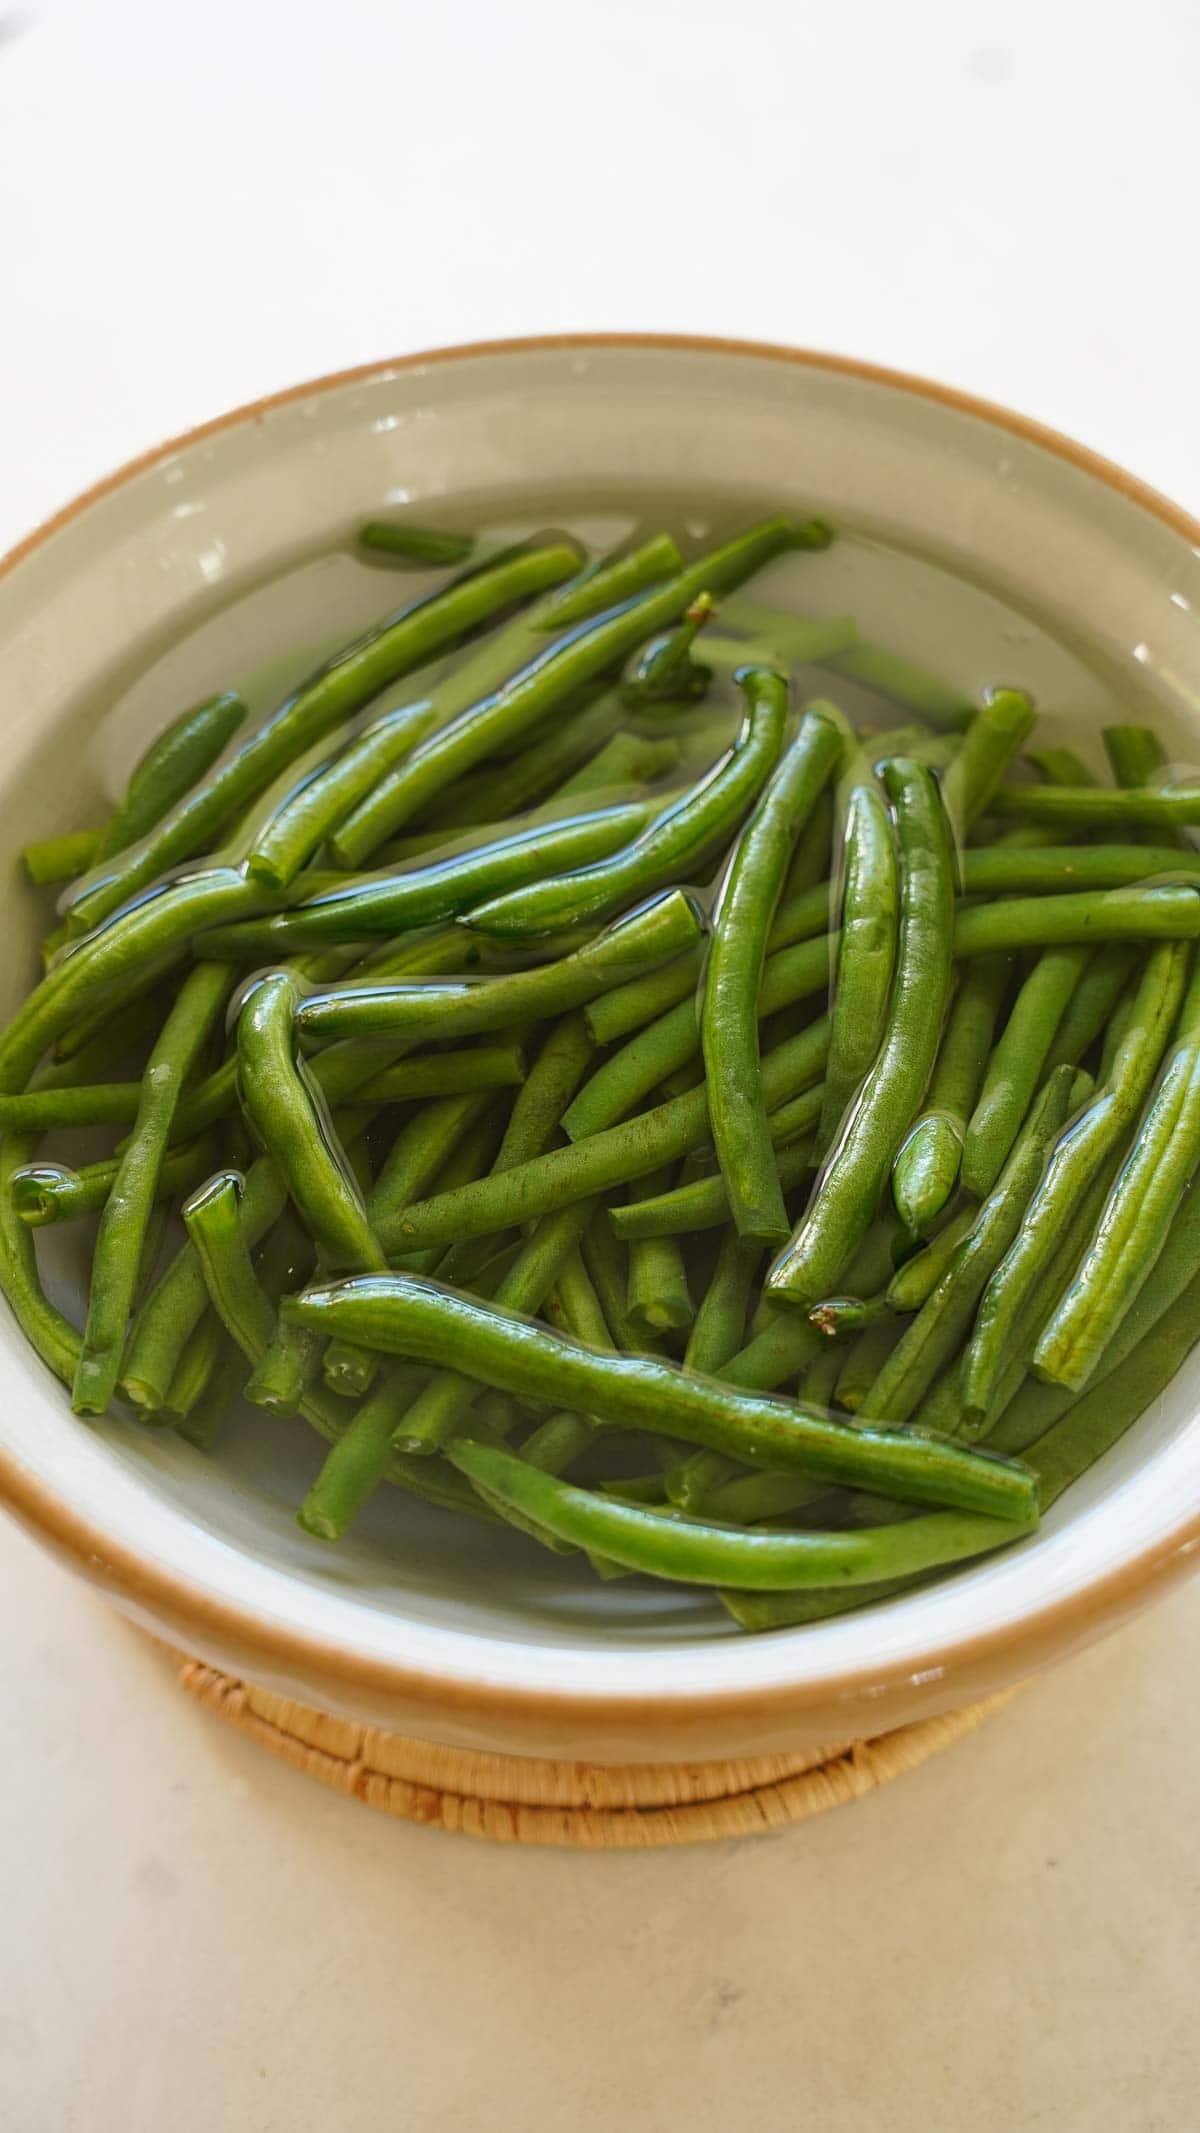 Green beans in a bowl of water cooling